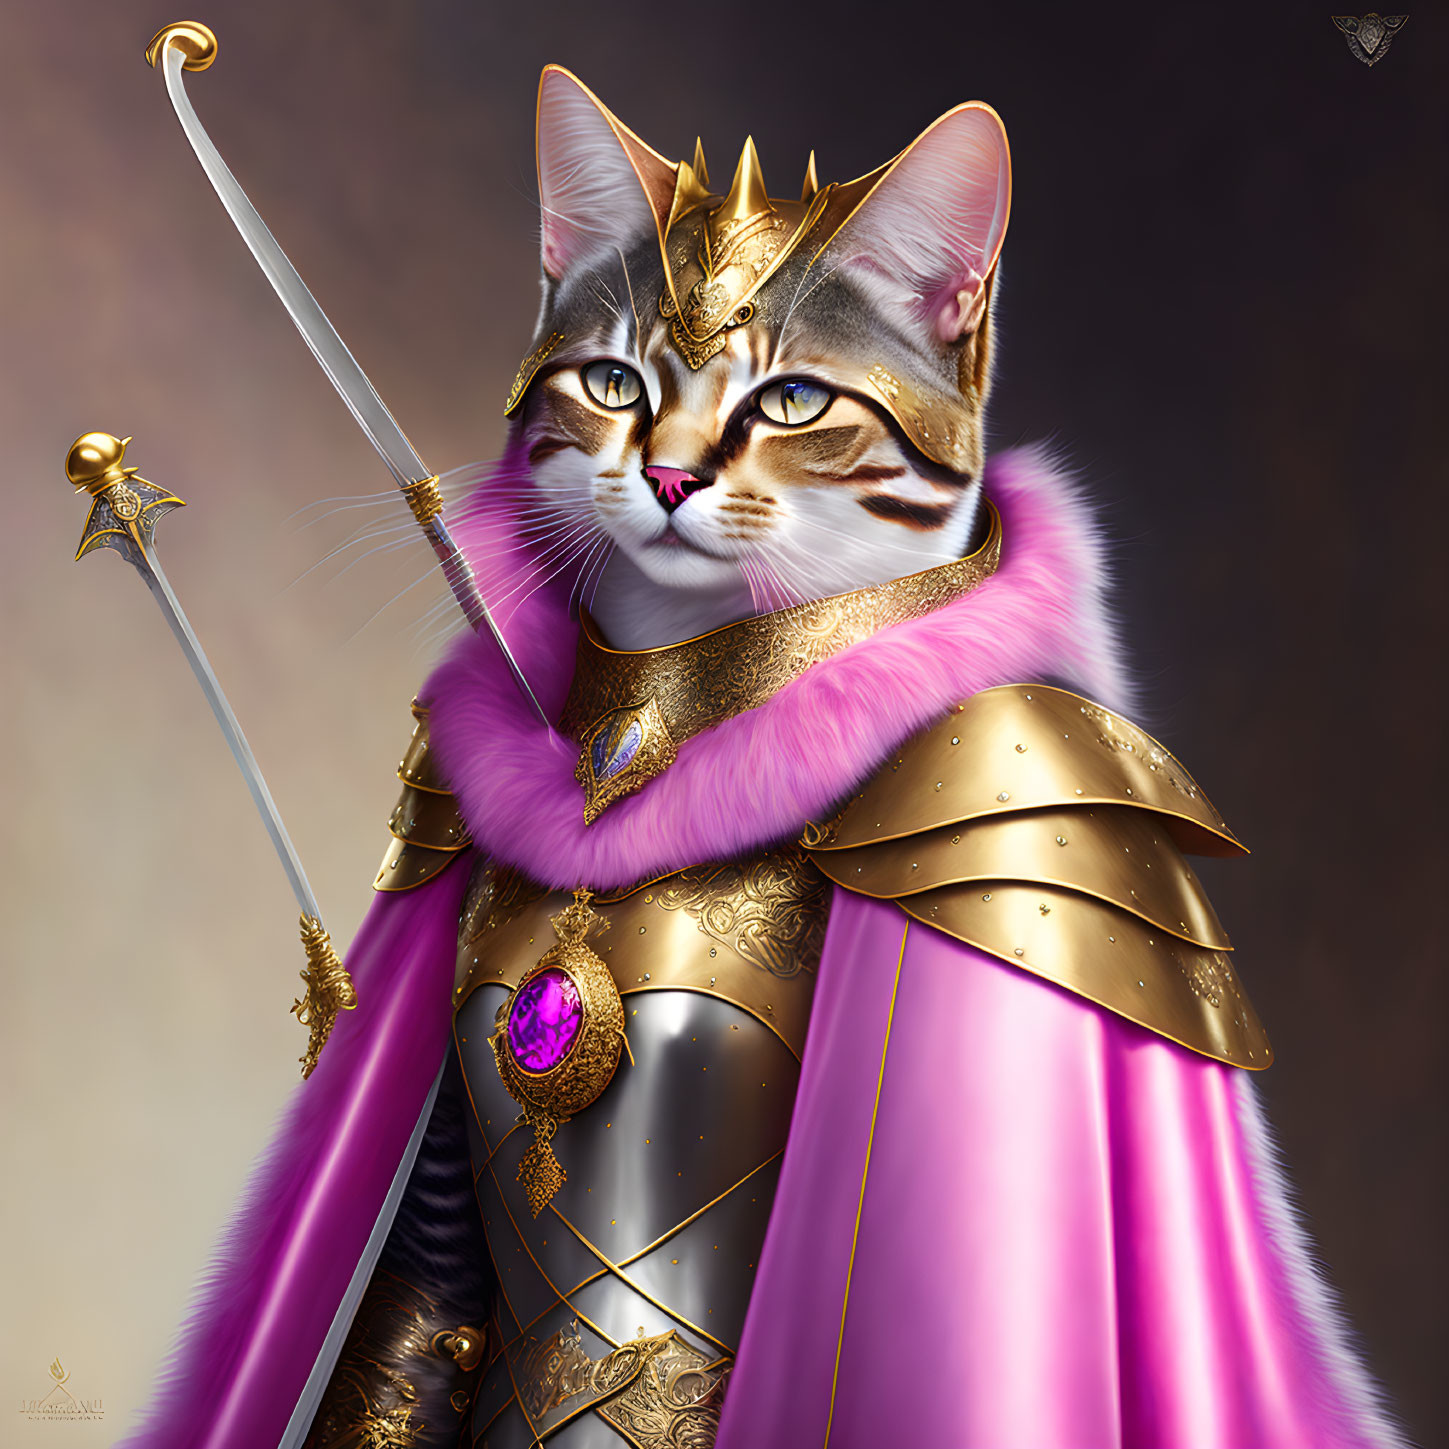 Regal Cat in Golden Armor and Crown with Scepter